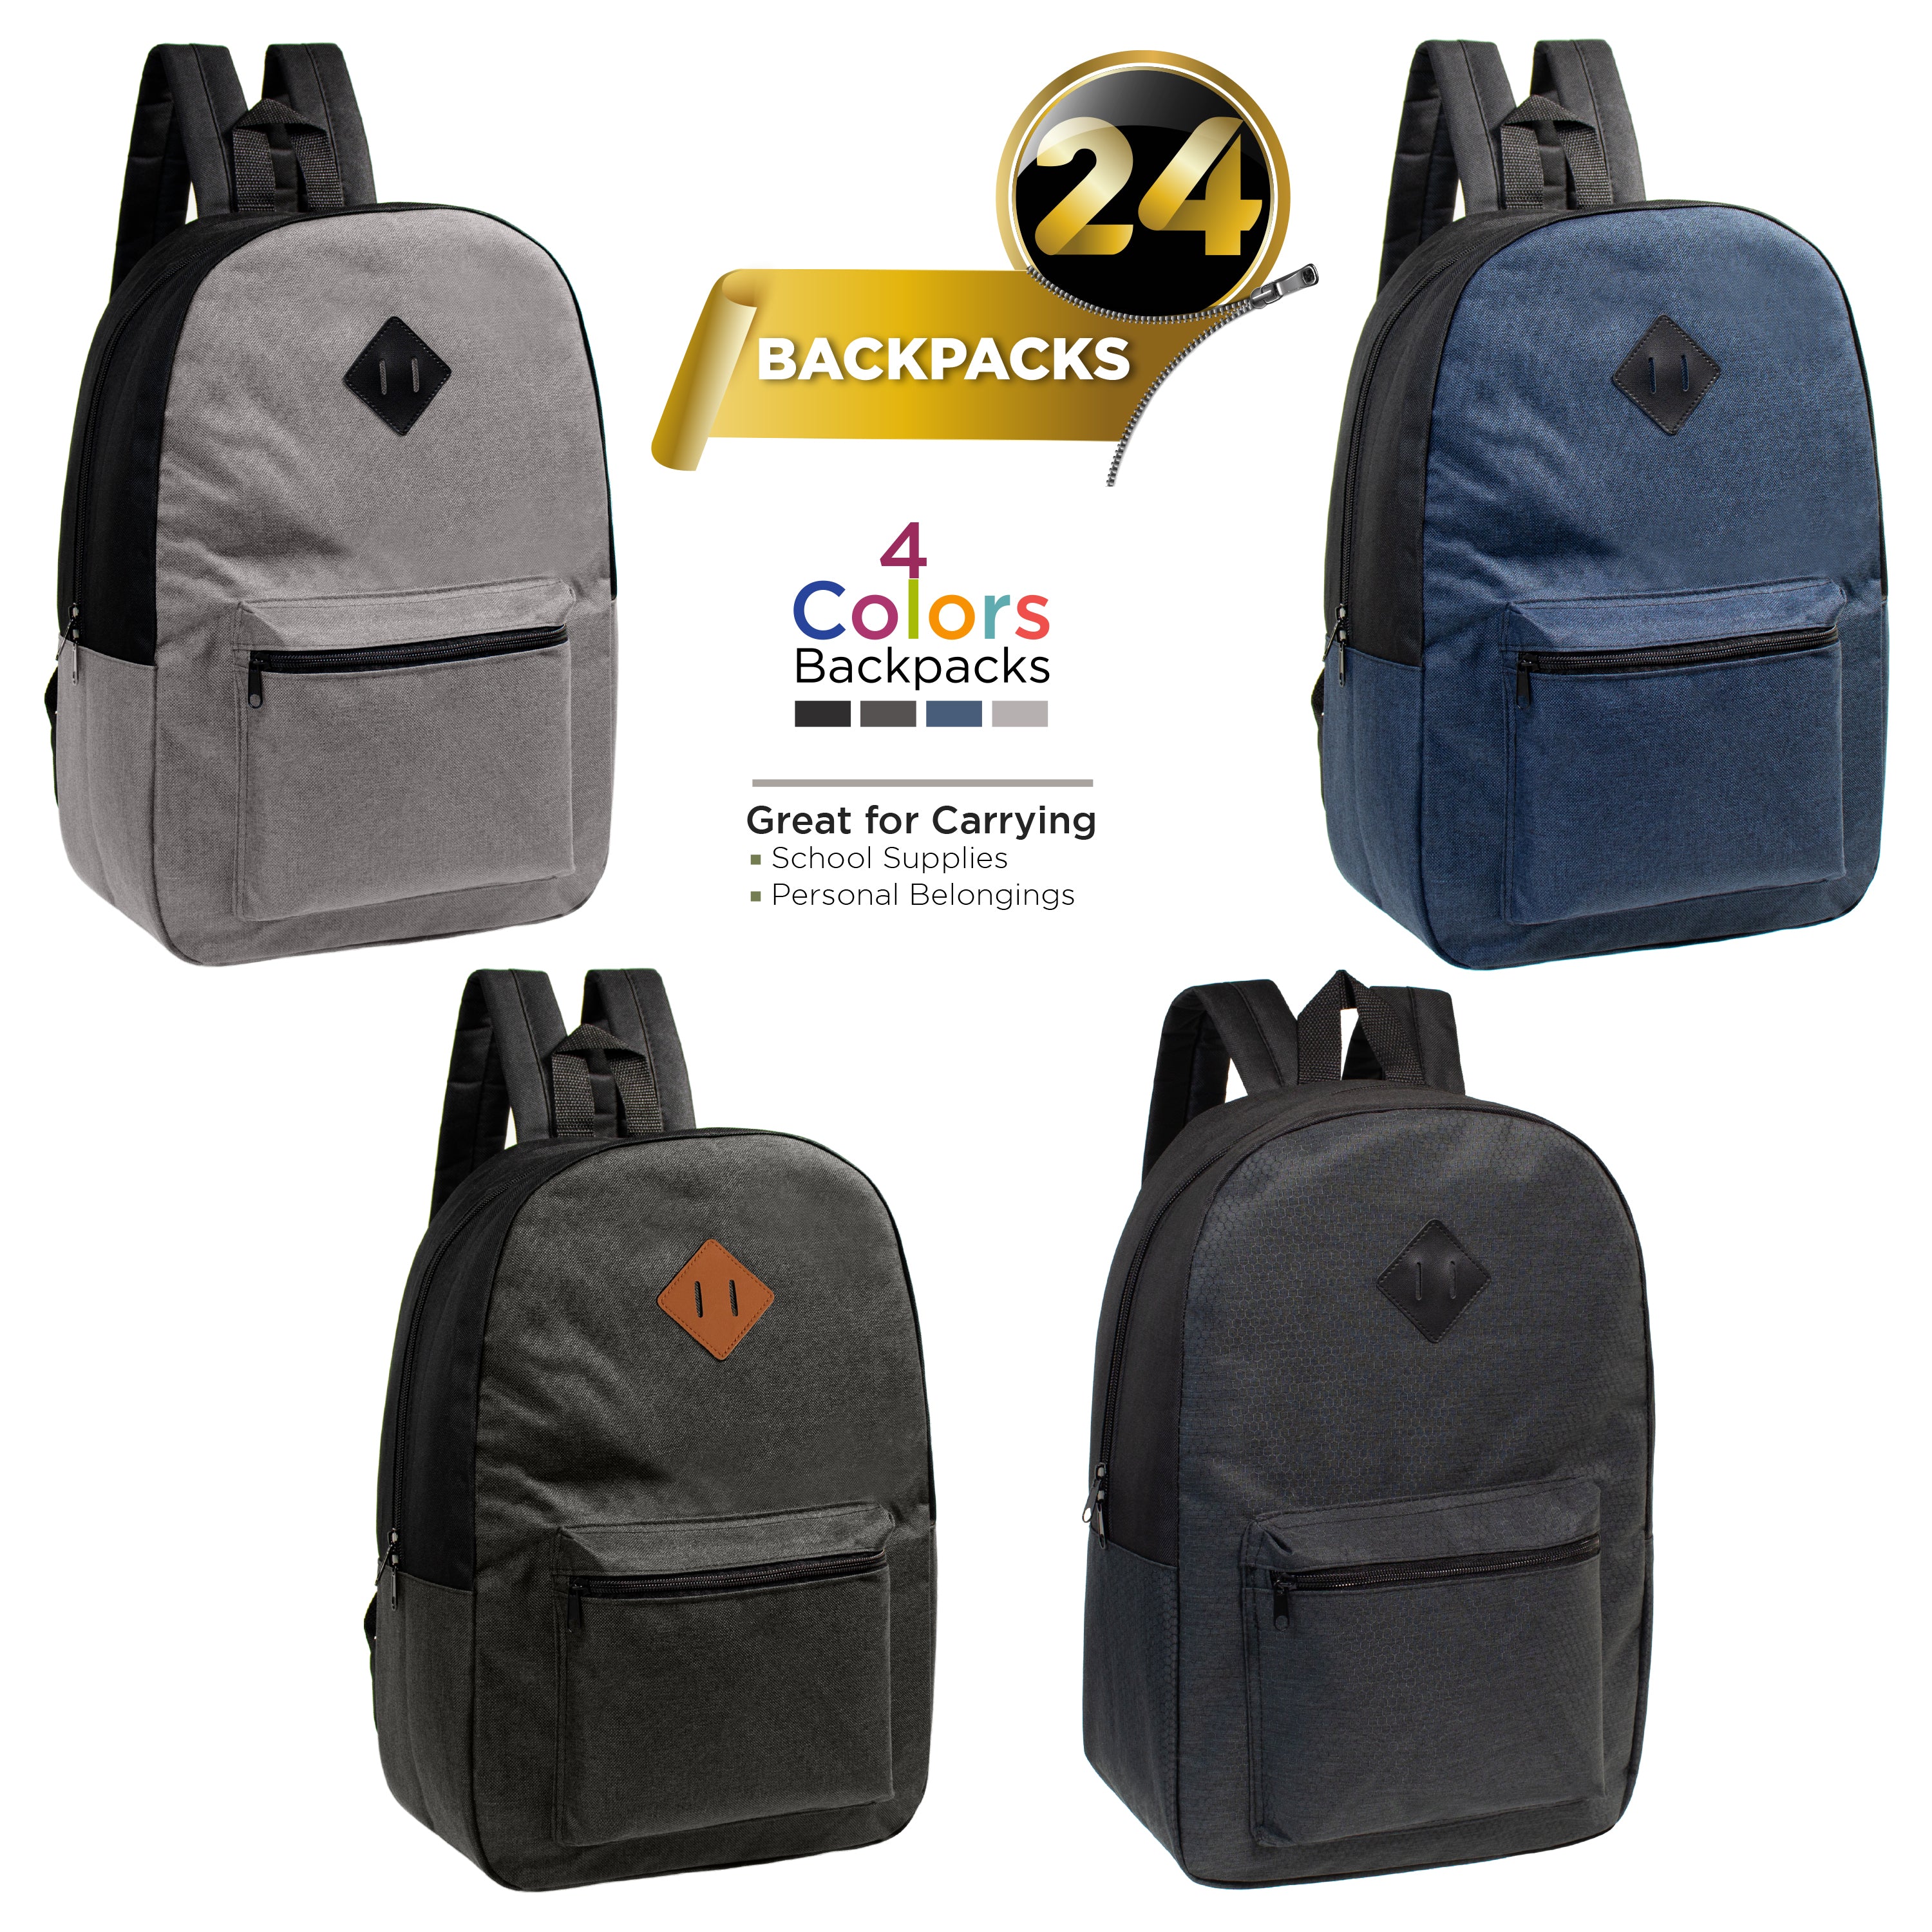 17" Kids Basic Wholesale Backpack in Assorted 4 Colors Diamond Patch - Bulk Case of 24 Backpacks